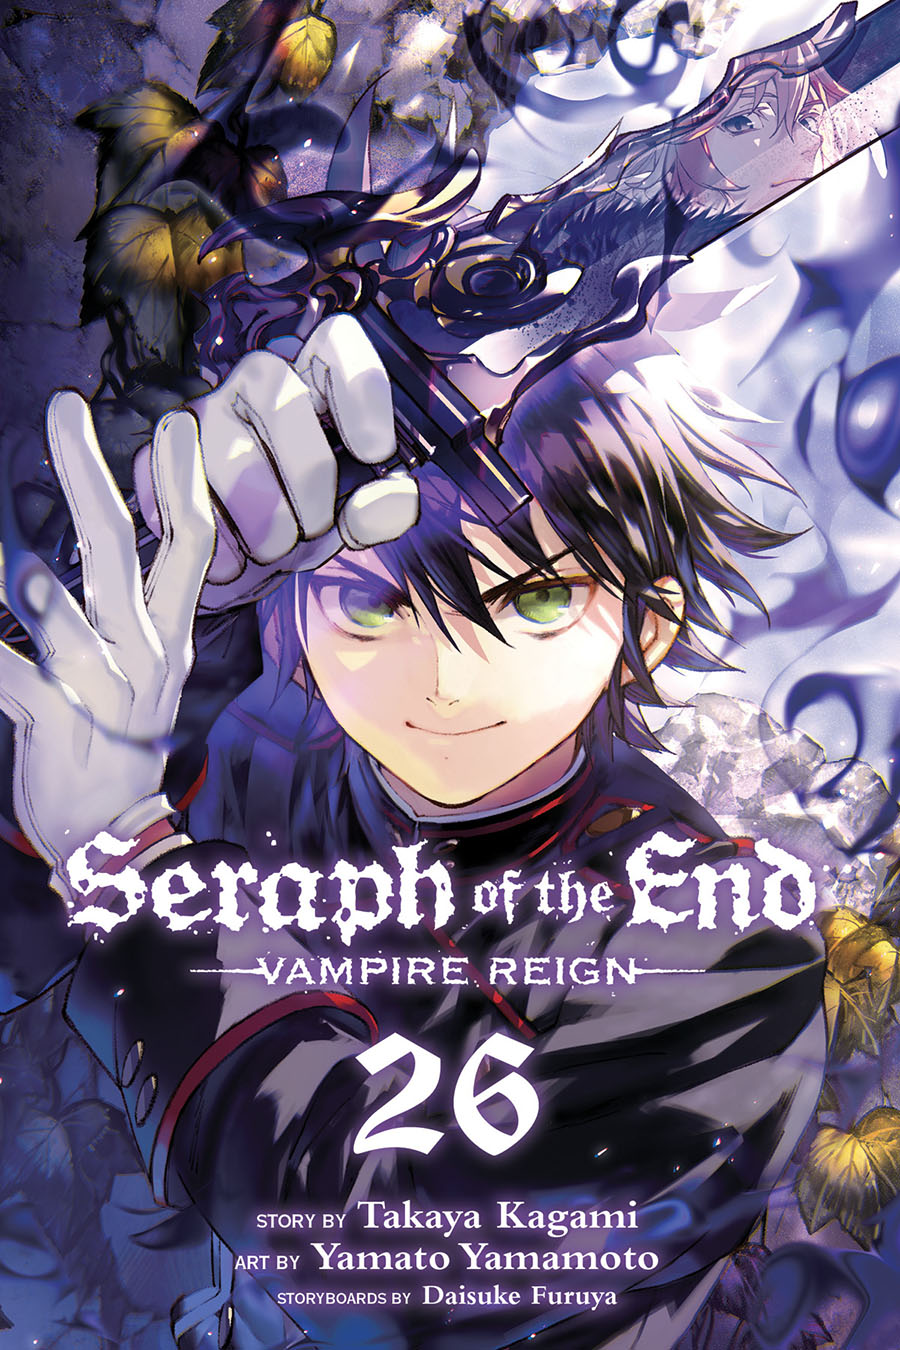 Seraph Of The End Vampire Reign Vol 26 TP